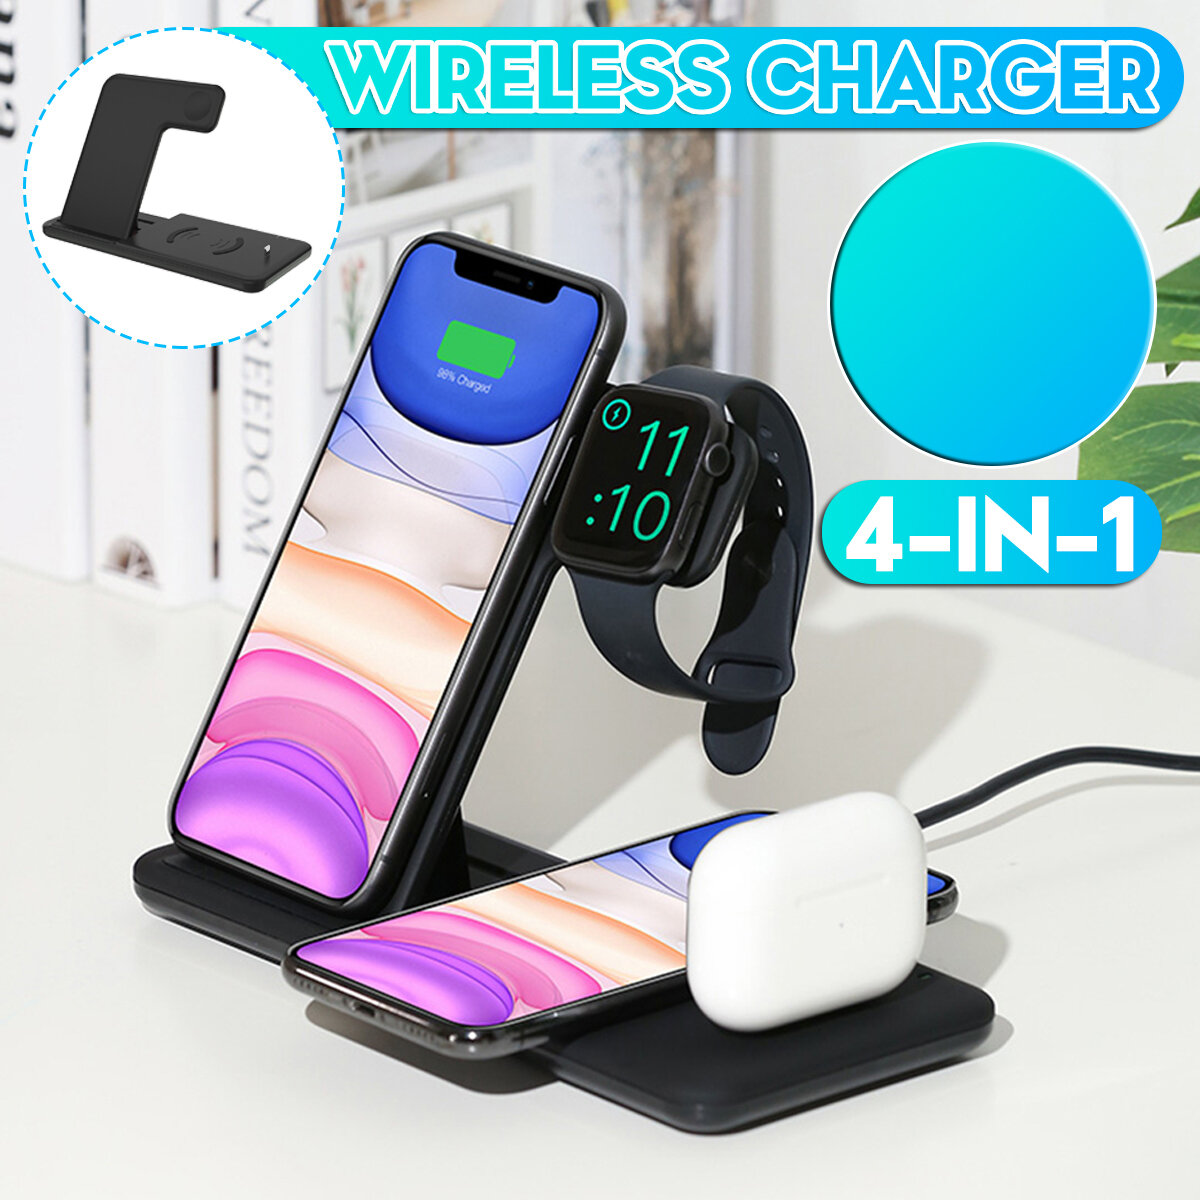 

Bakeey 4 in 1 Foldable 15W Qi Fast Wireless Charger Stand Dock Station for Airpods Pro iWatch for iPhone 12 Pro Max for